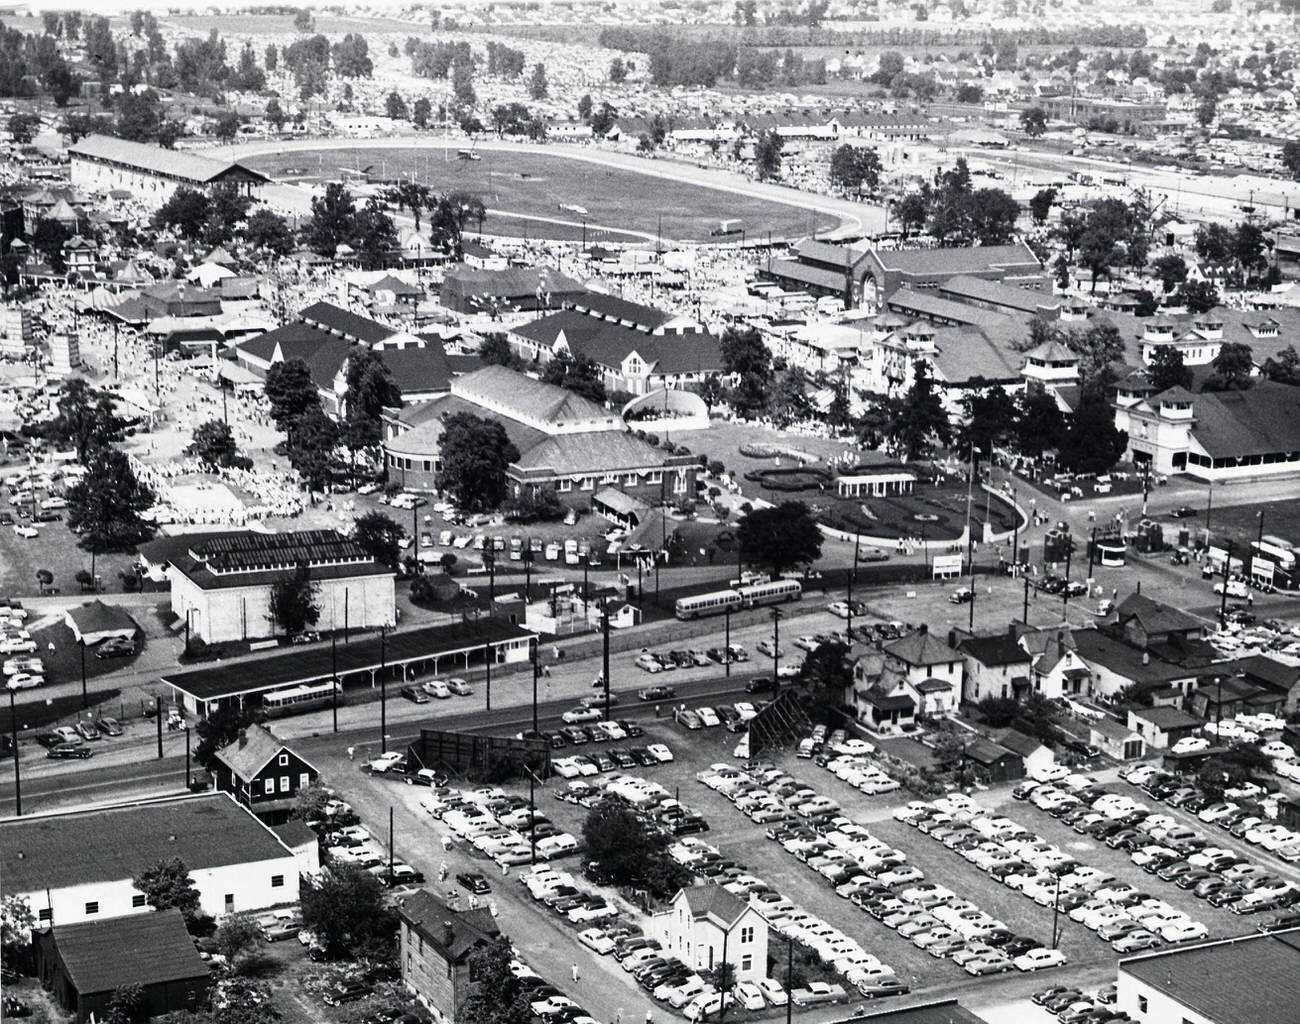 Aerial view of the Ohio State Fairgrounds, looking northeast from near East 11th Avenue, early 1950s.